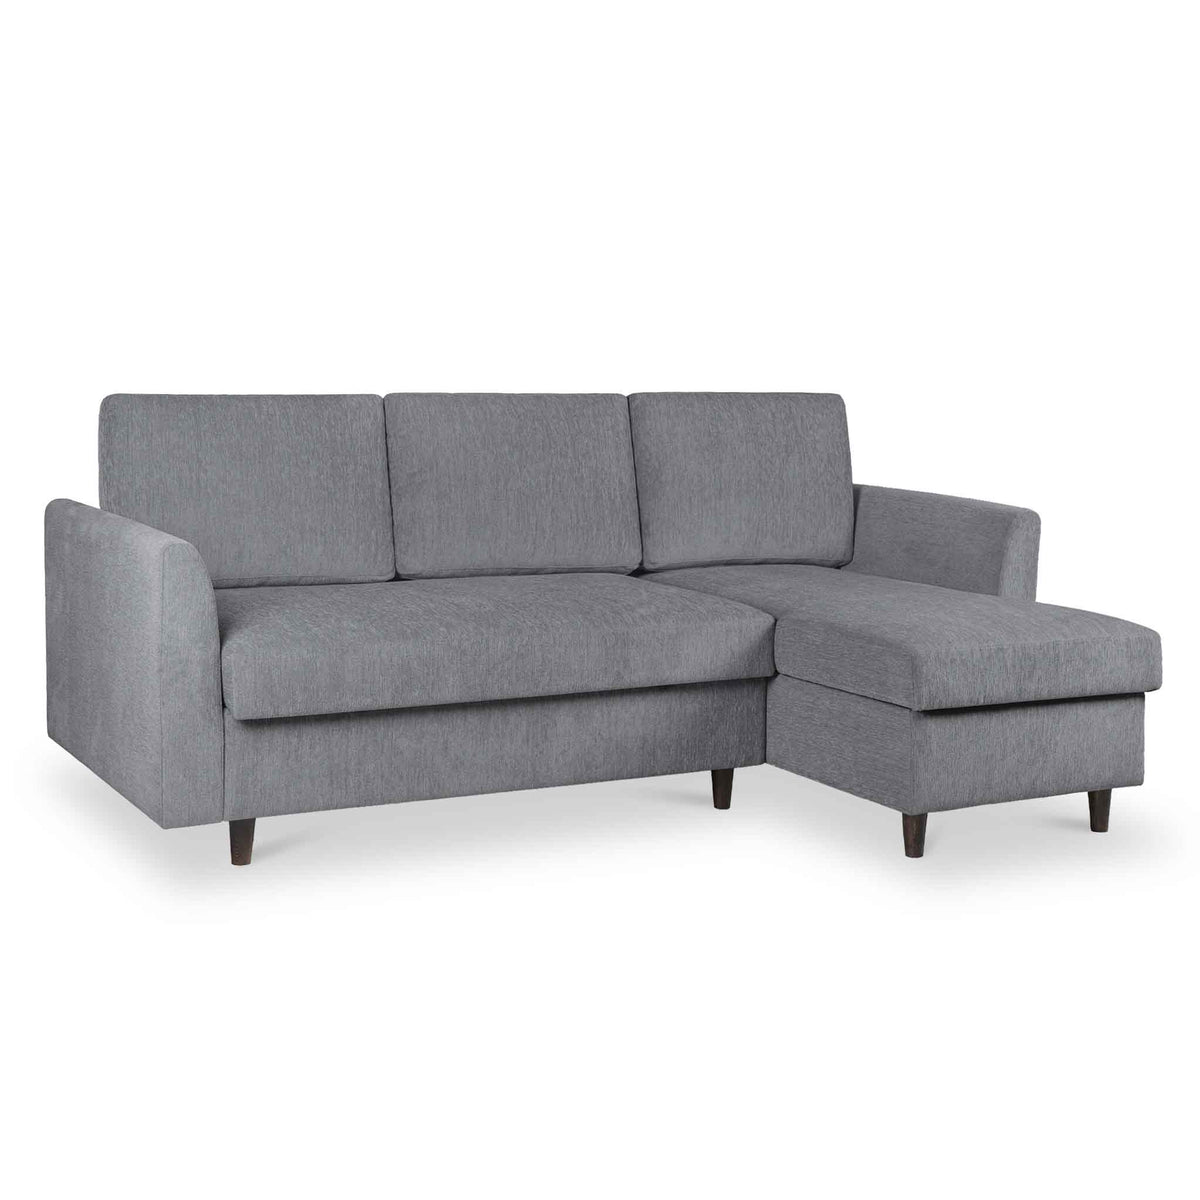 Millen Grey Chaise Sofa Bed from Roseland